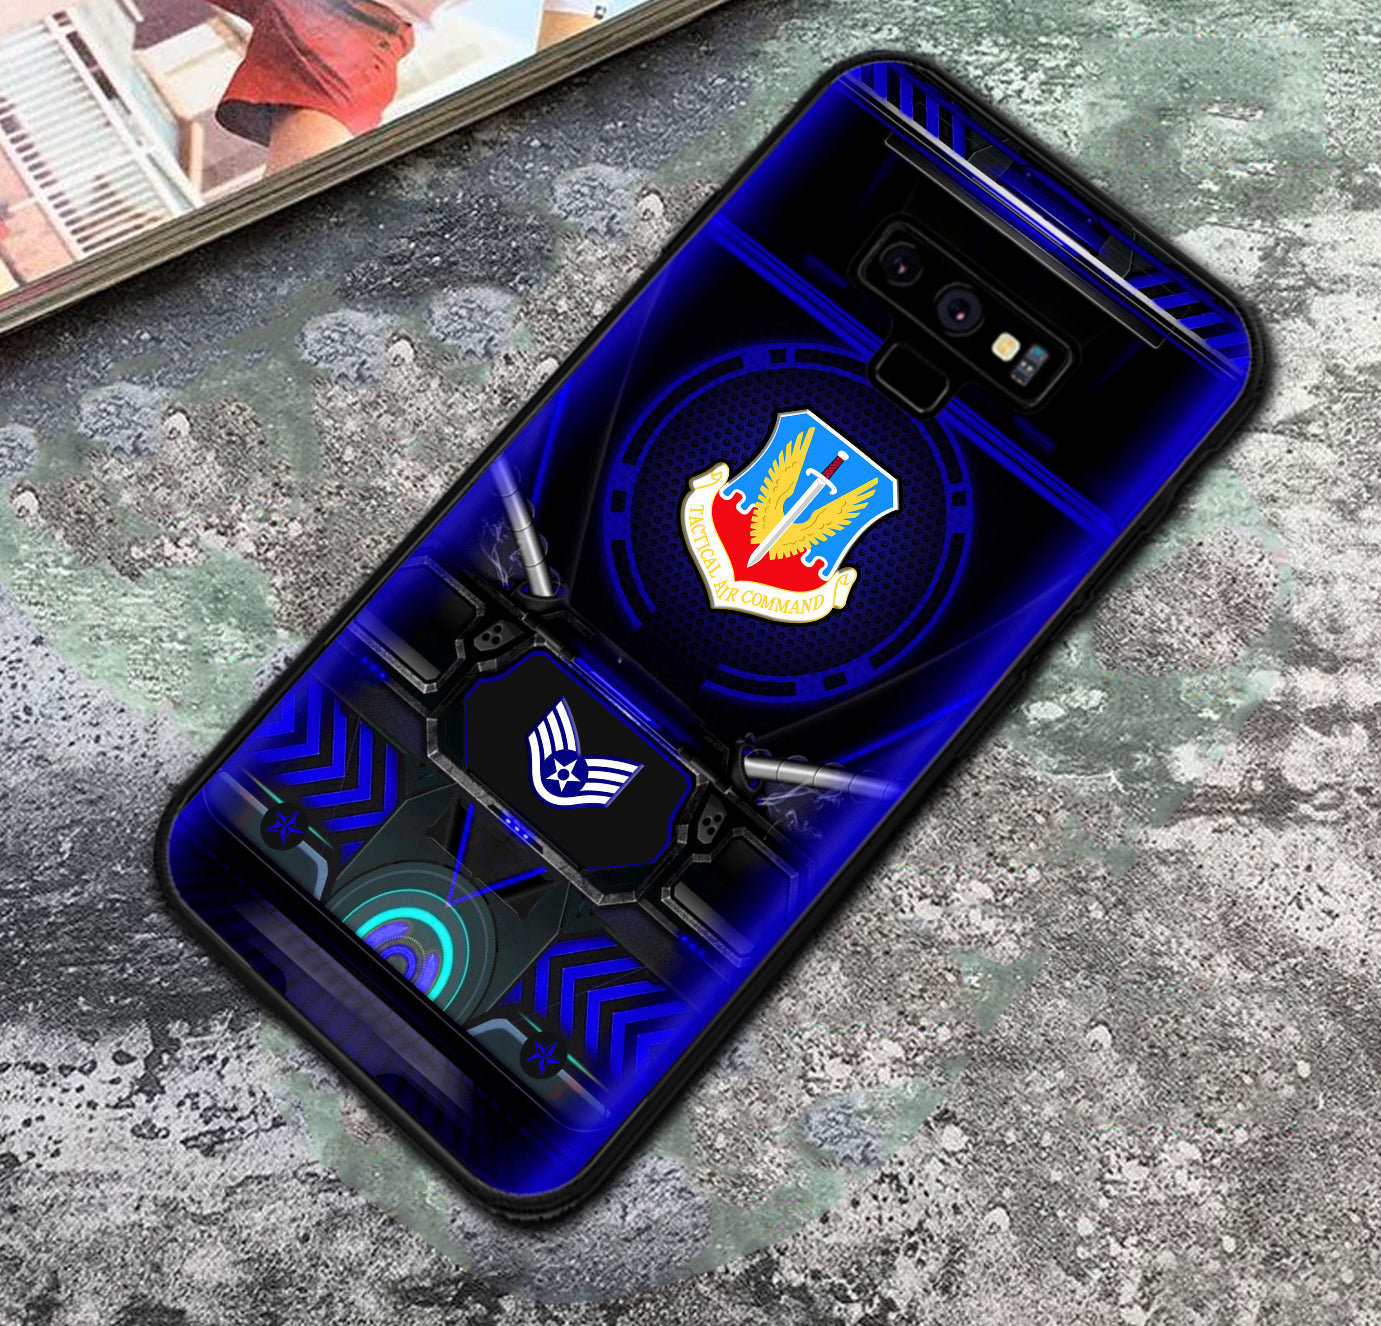 Personalized US Military - Air Force Command Phone Case Printed